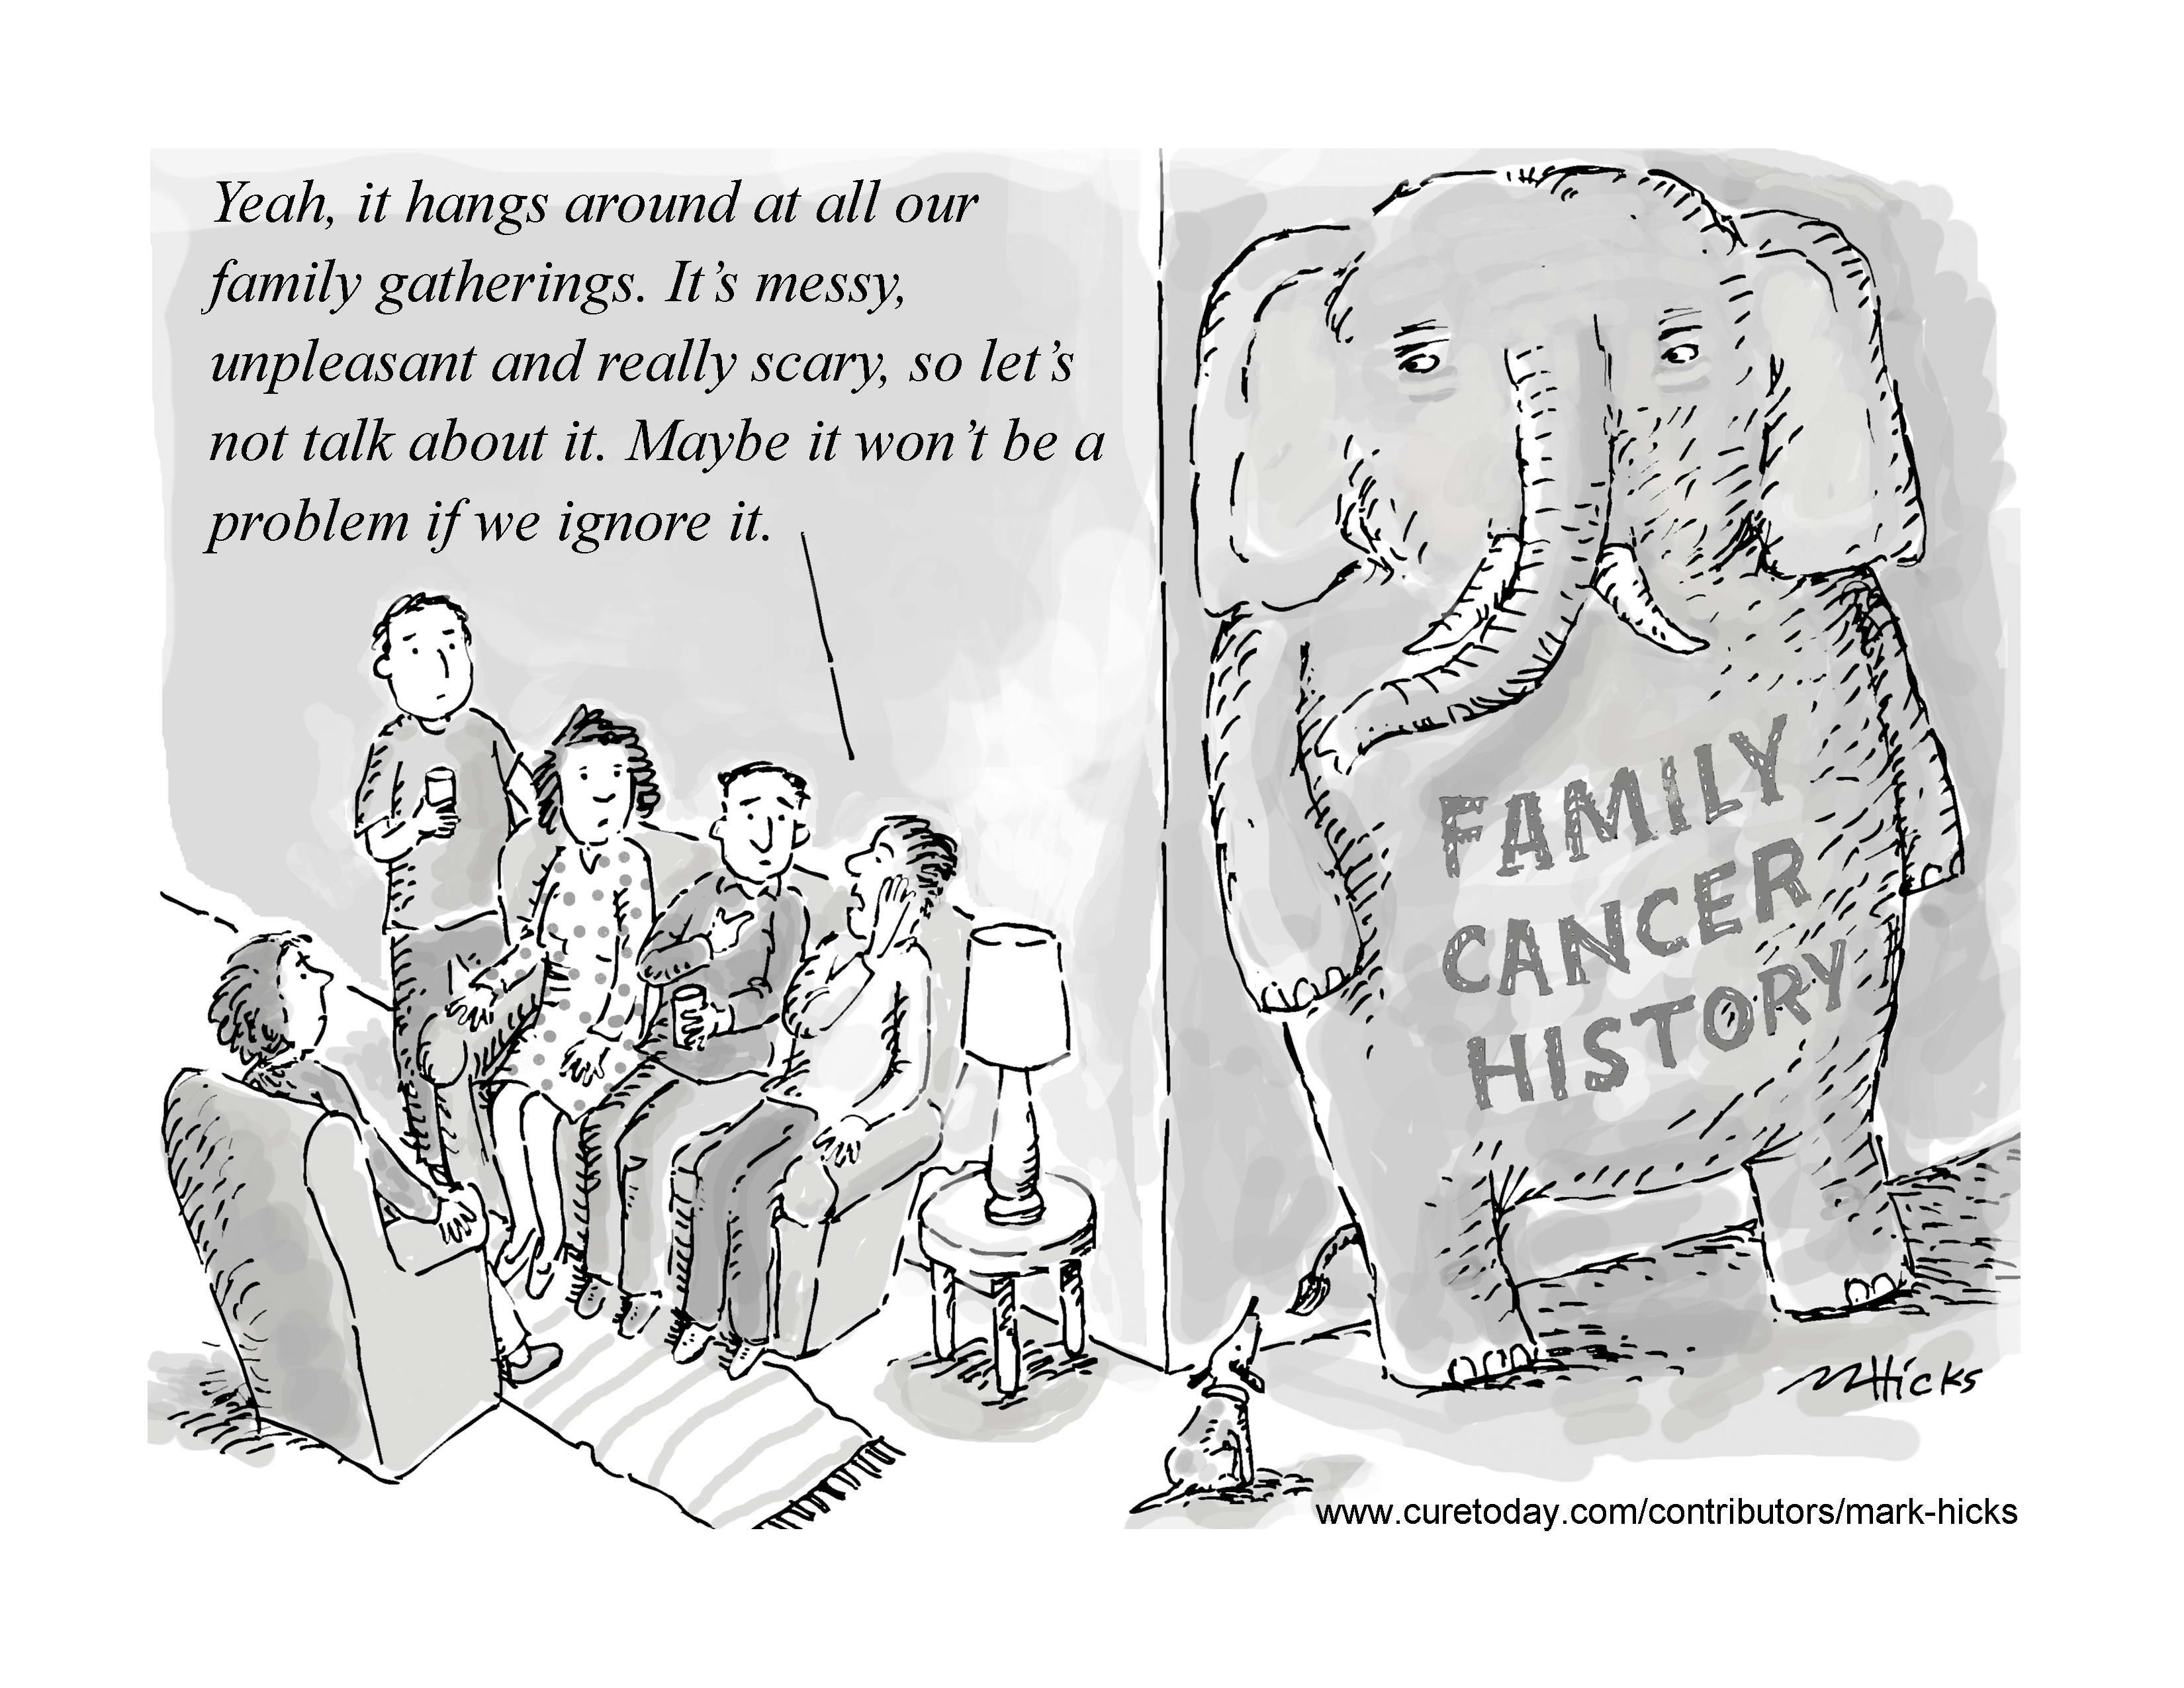 Talking about family cancer history can be like discussin the elephant in the room.   Cartoon by Mark Hicks